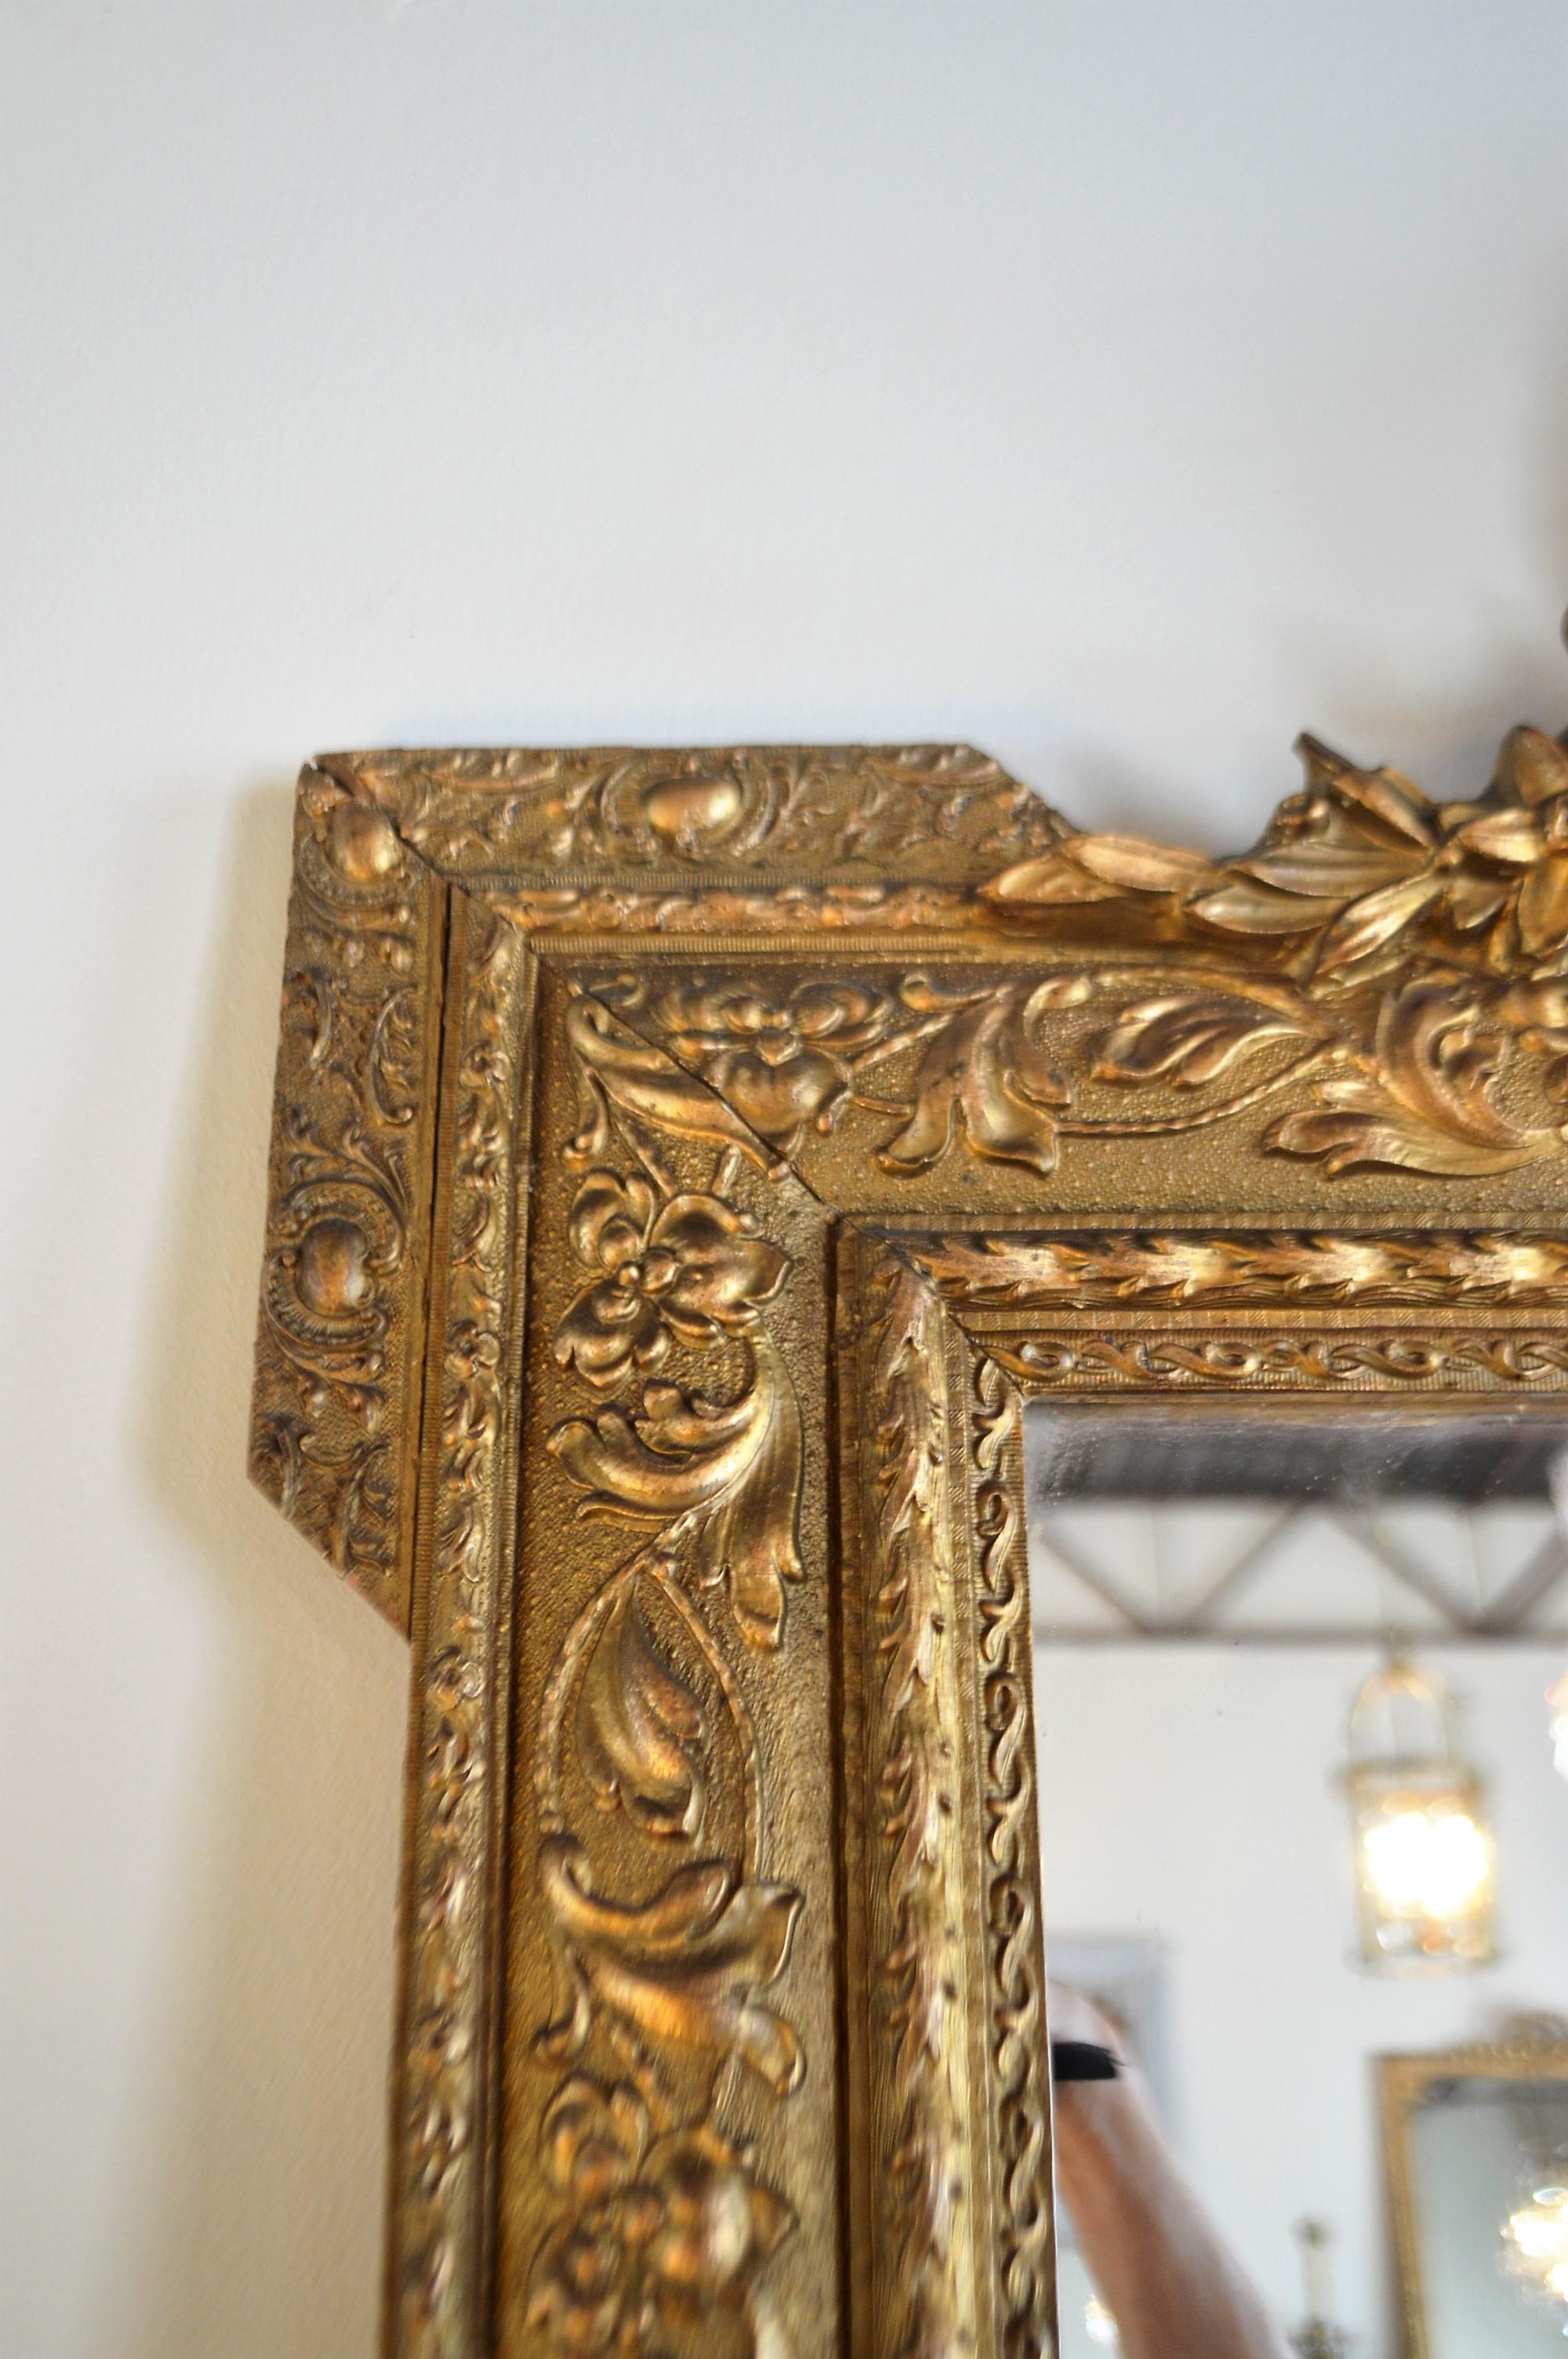 20th Century Louis XVI Style Wood Gilded Mirror with Wreath Decorative Top and Carved Frame